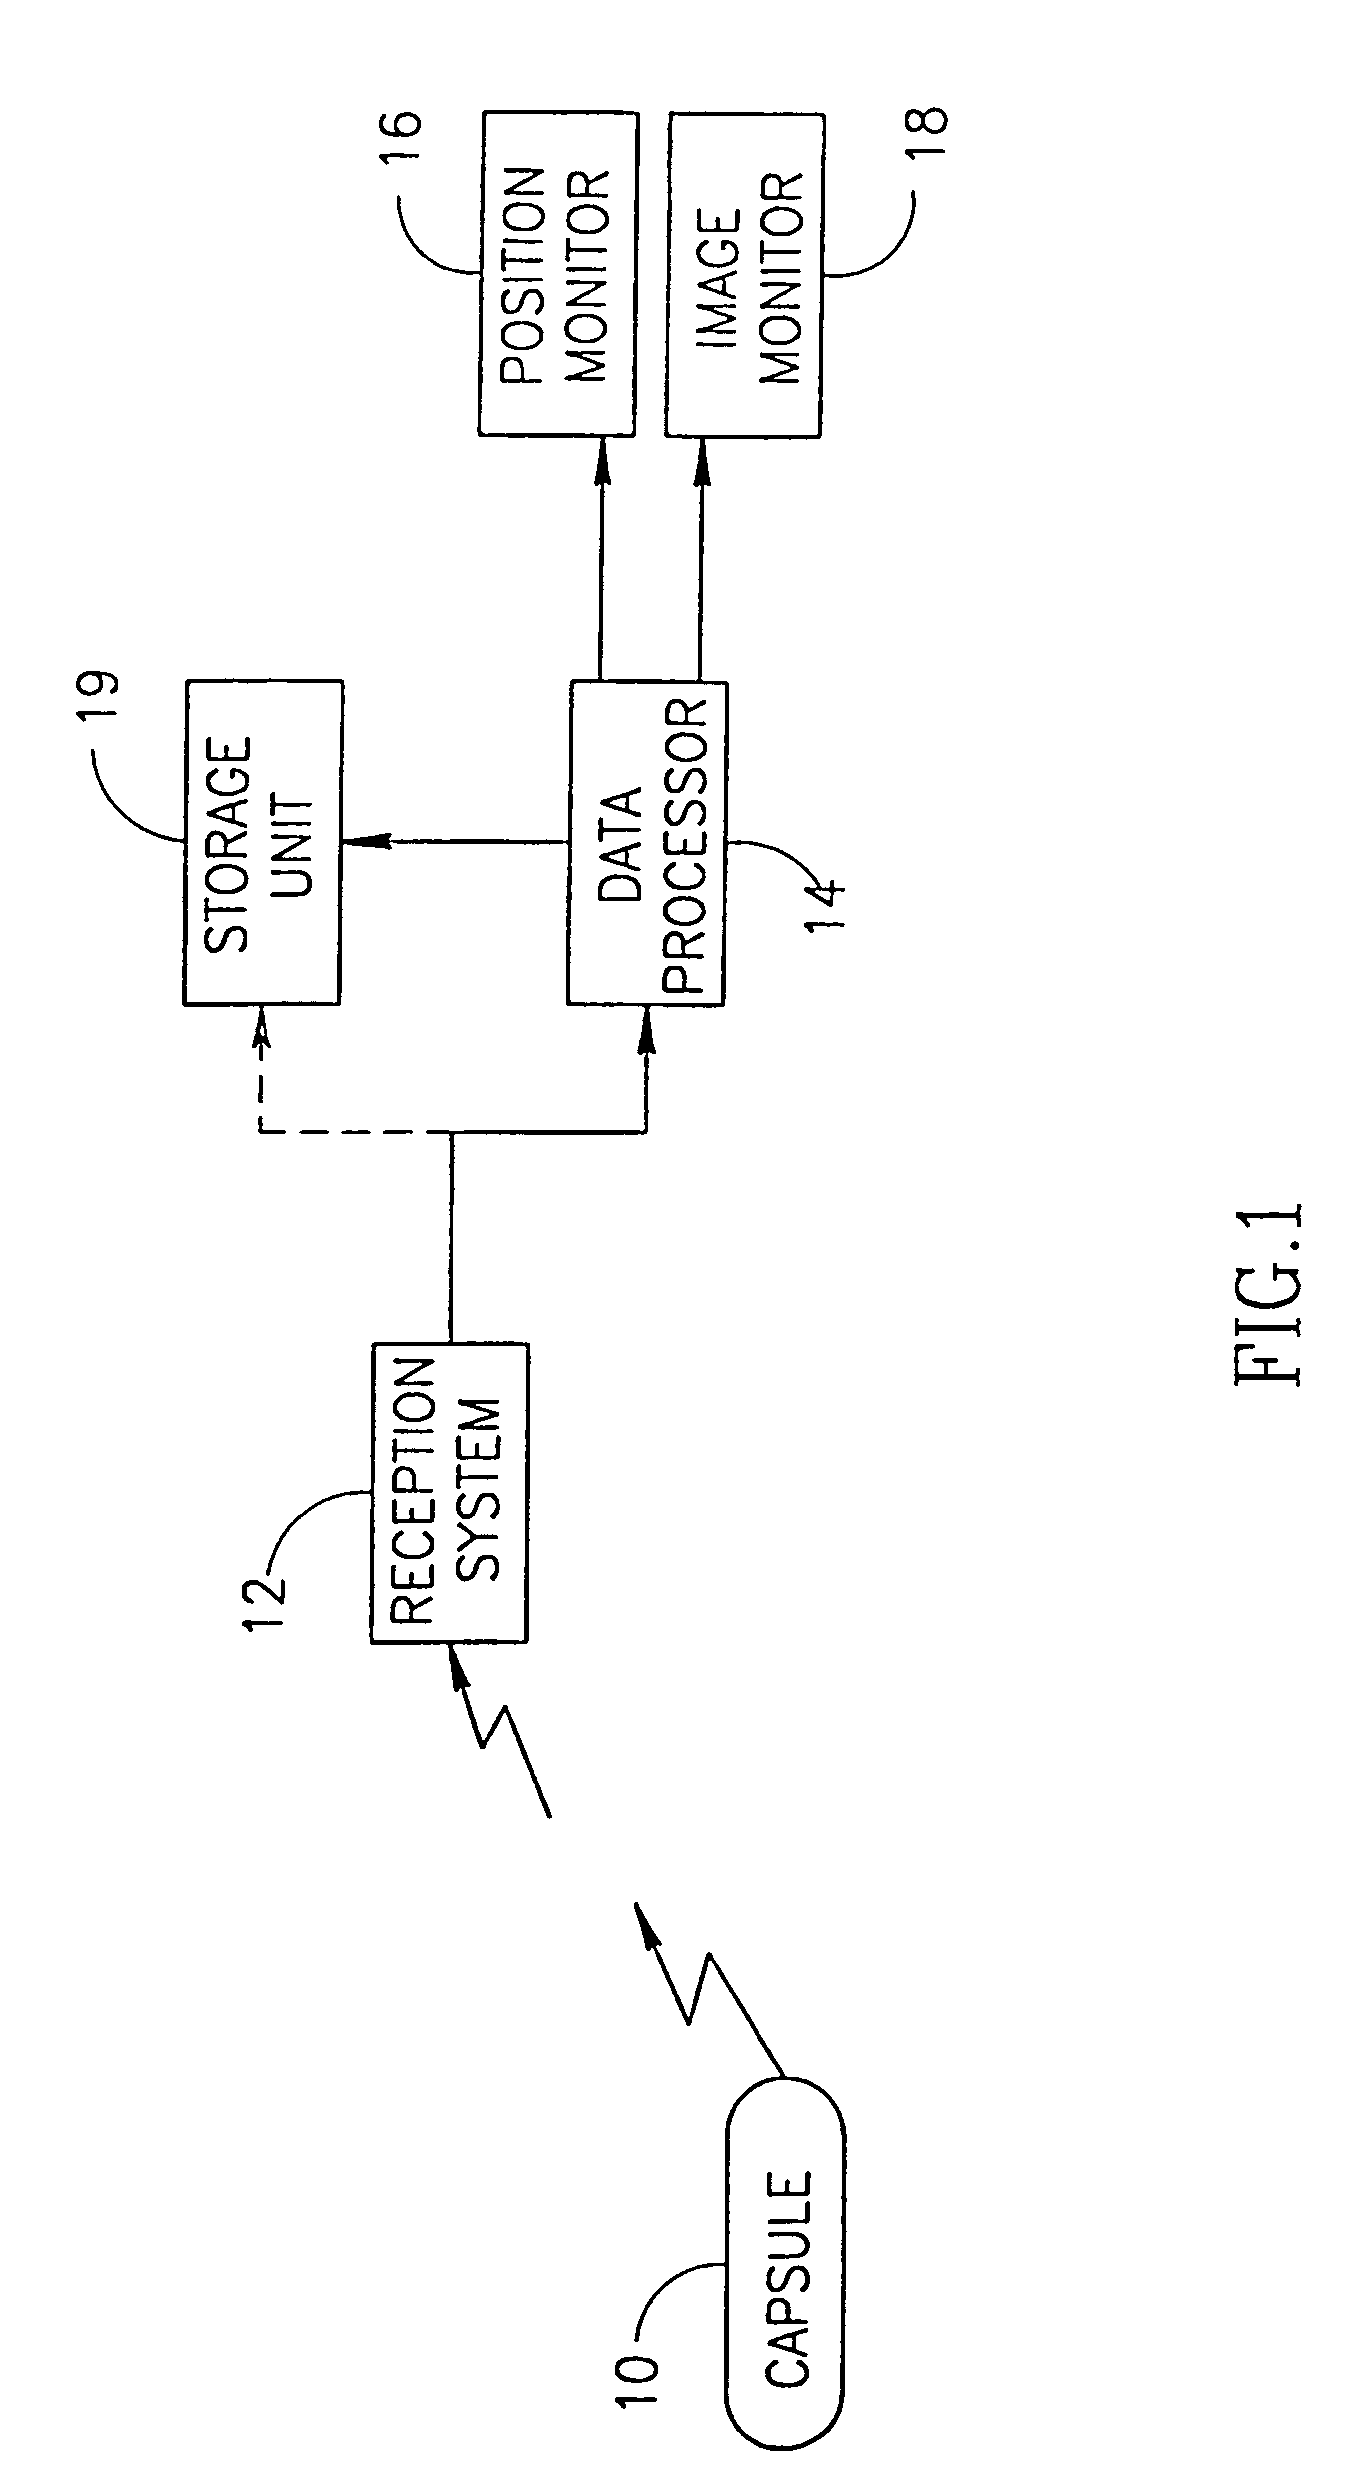 Method for delivering a device to a target location